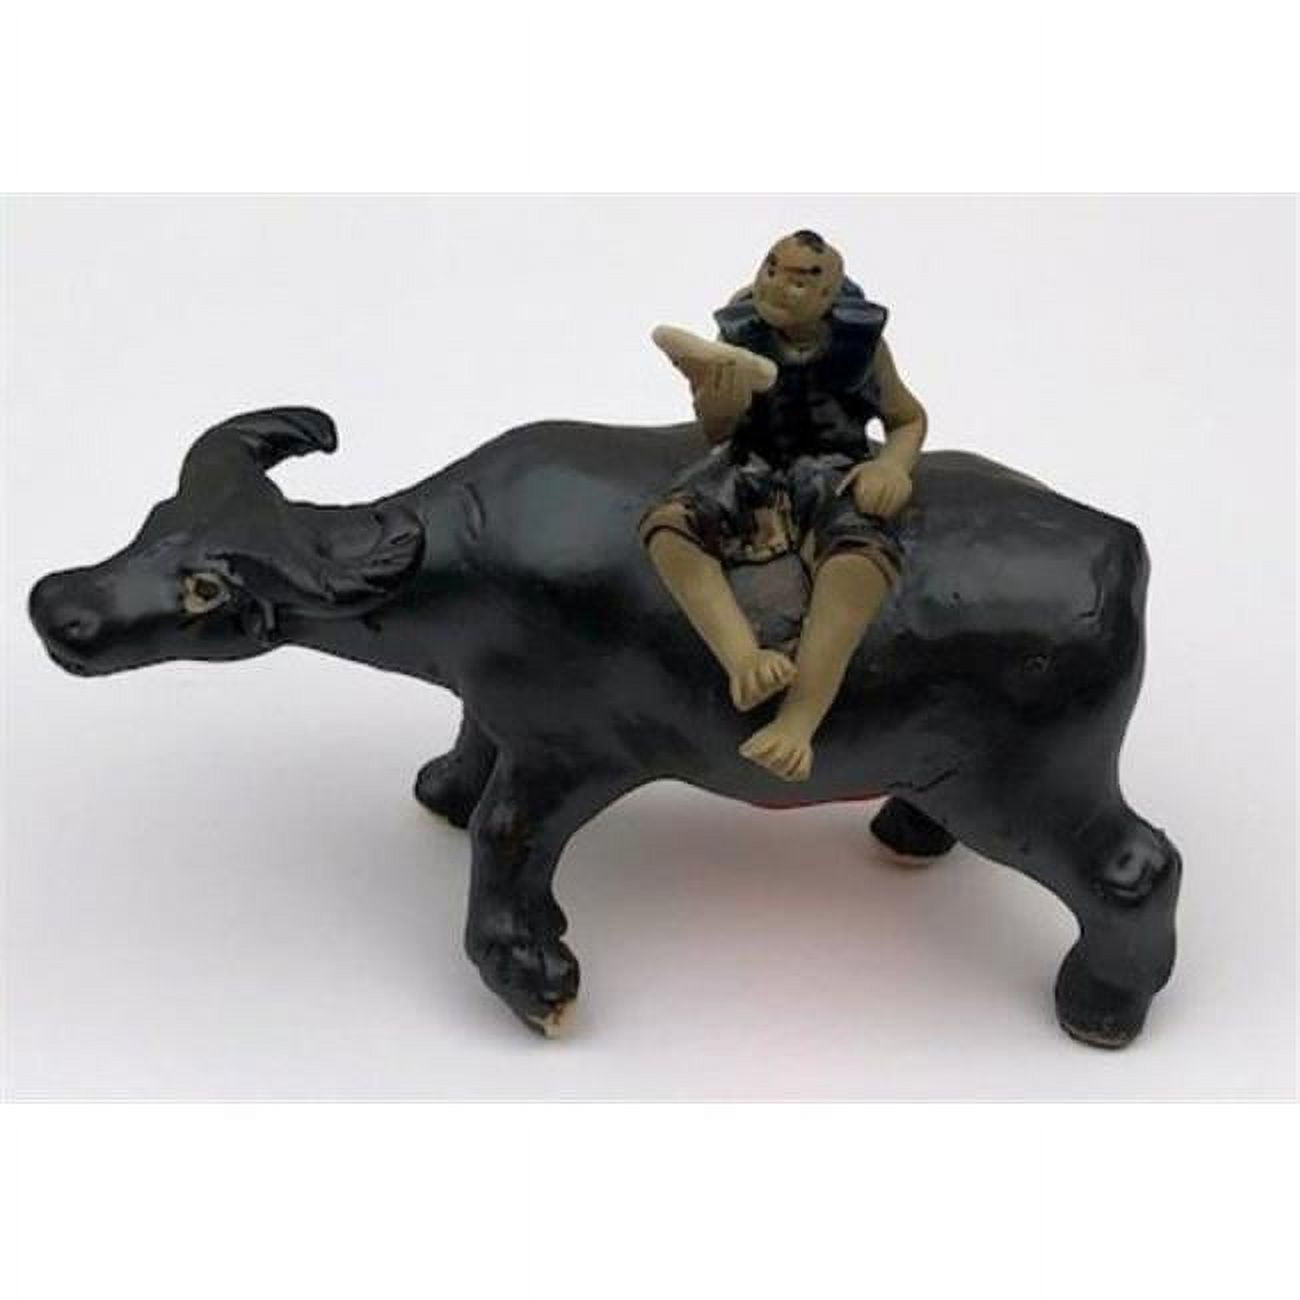 Picture of Bonsai Boy of New York e3540 3.5 in. Boy Sitting on Standing Buffalo Ceramic Figurine, Large